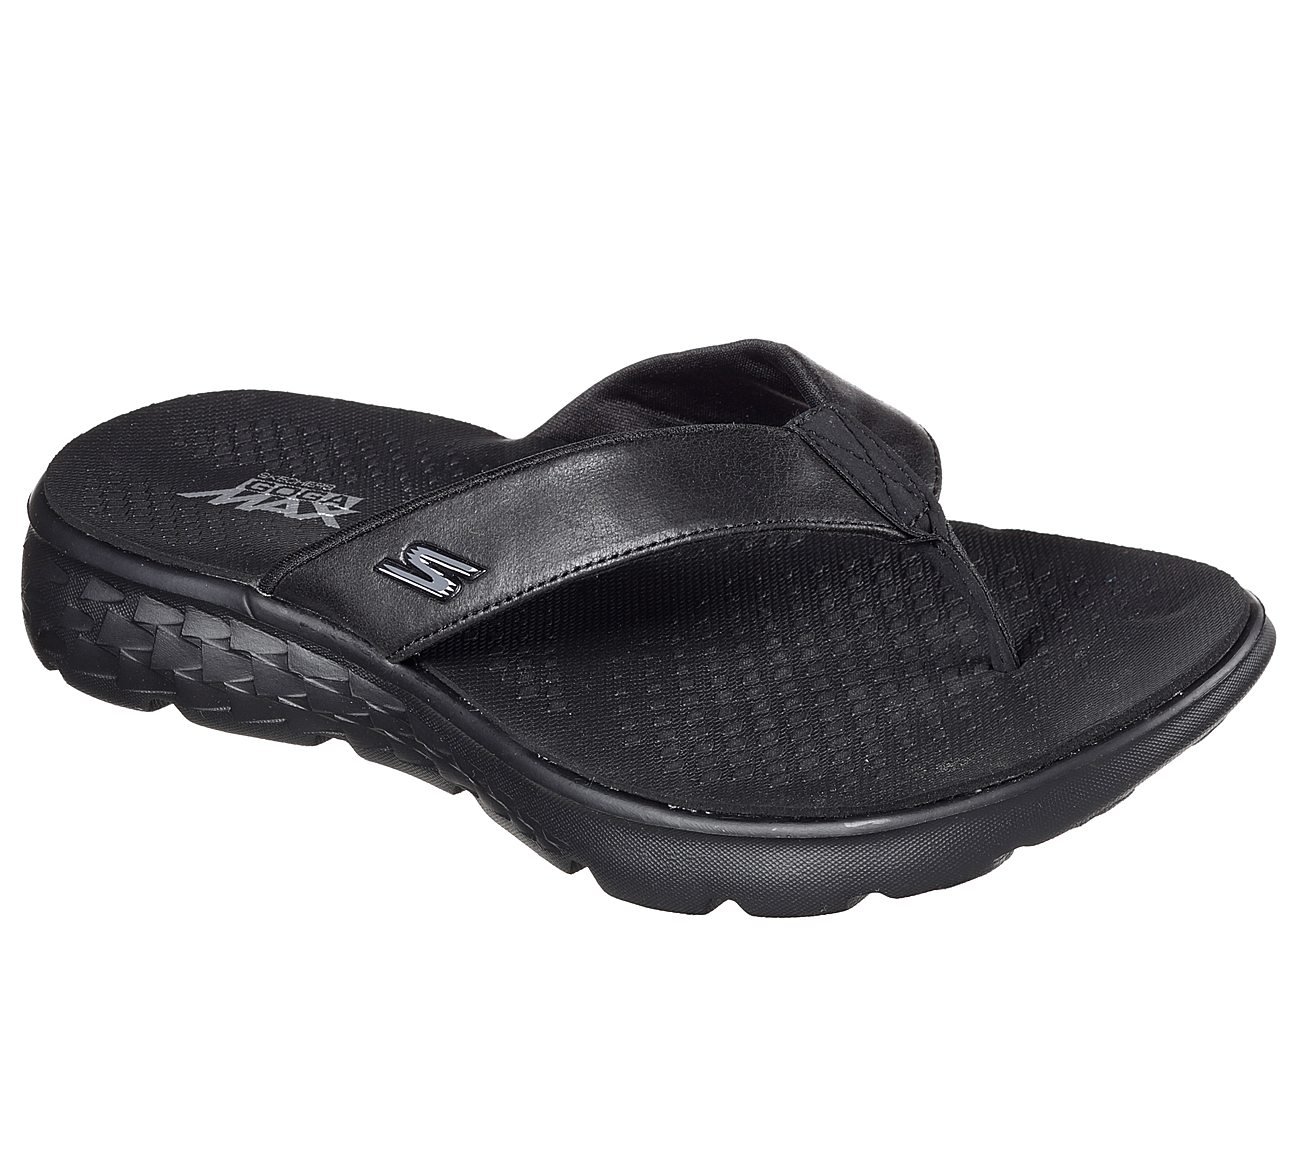 ON-THE-GO 400 - VISTA, BBLACK Footwear Lateral View